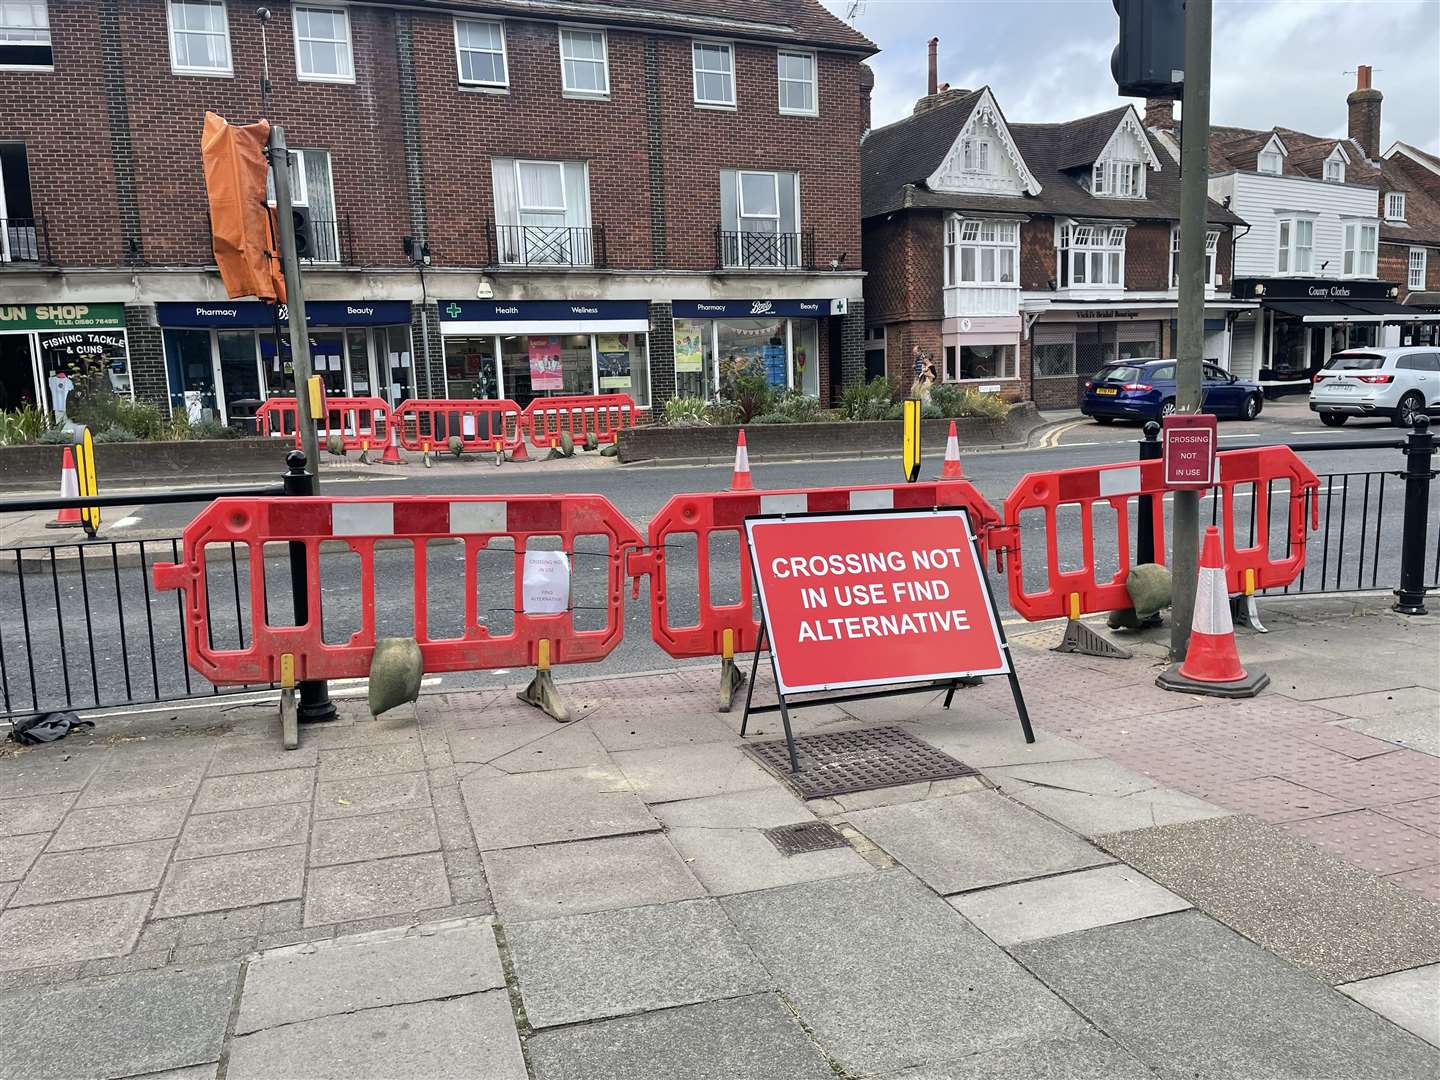 The crossing between Boots and M&Co in Tenterden has been closed